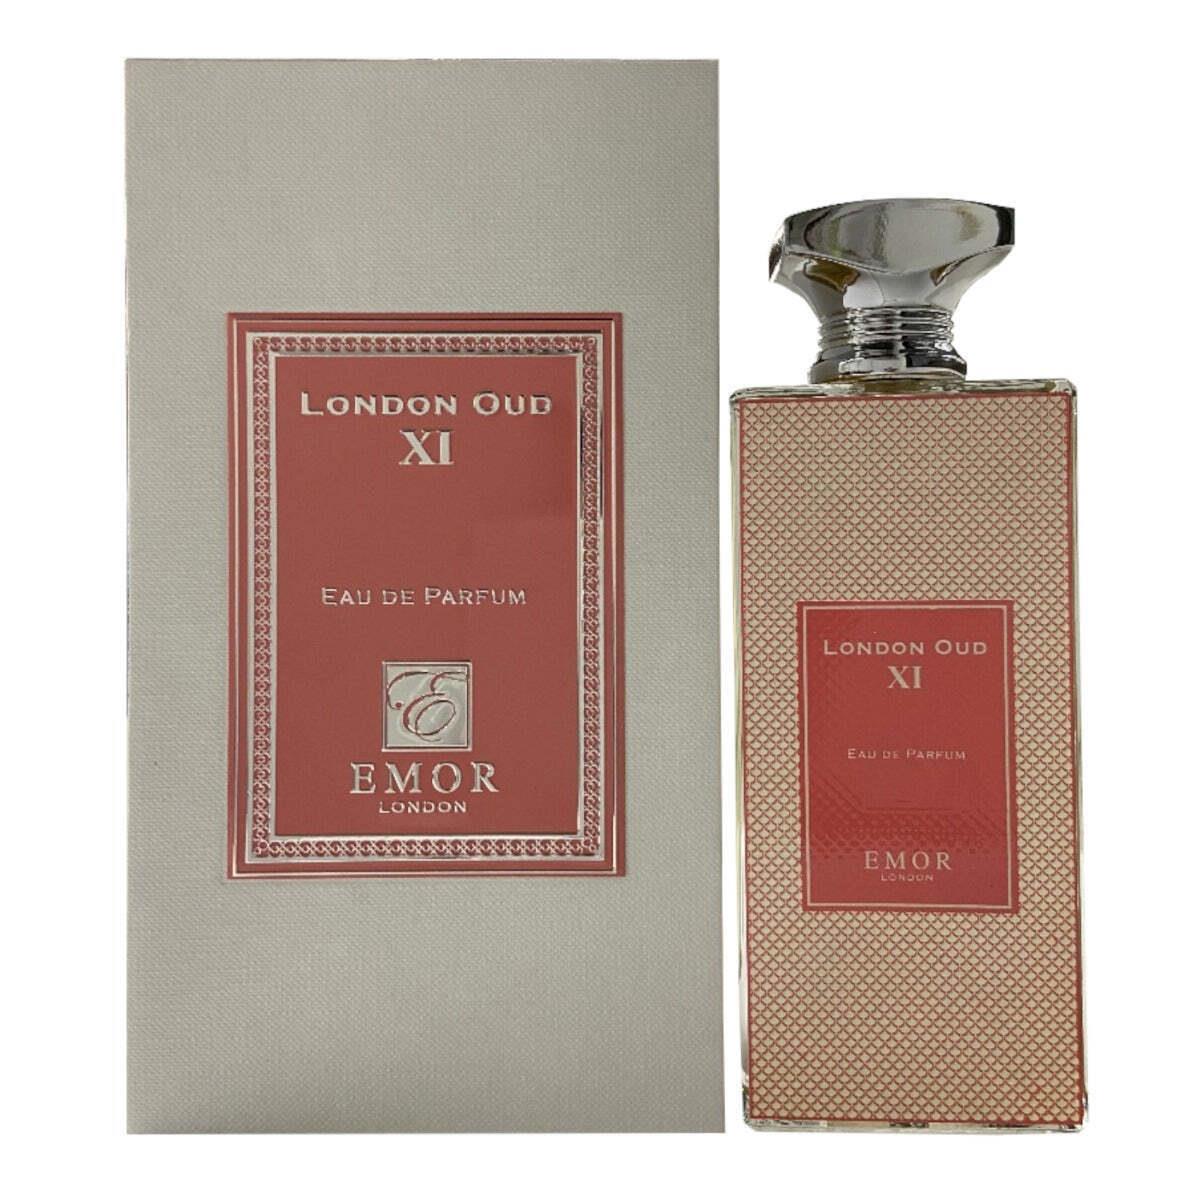 London Oud No. XI by Emor London For Unisex Edp 4.2 oz